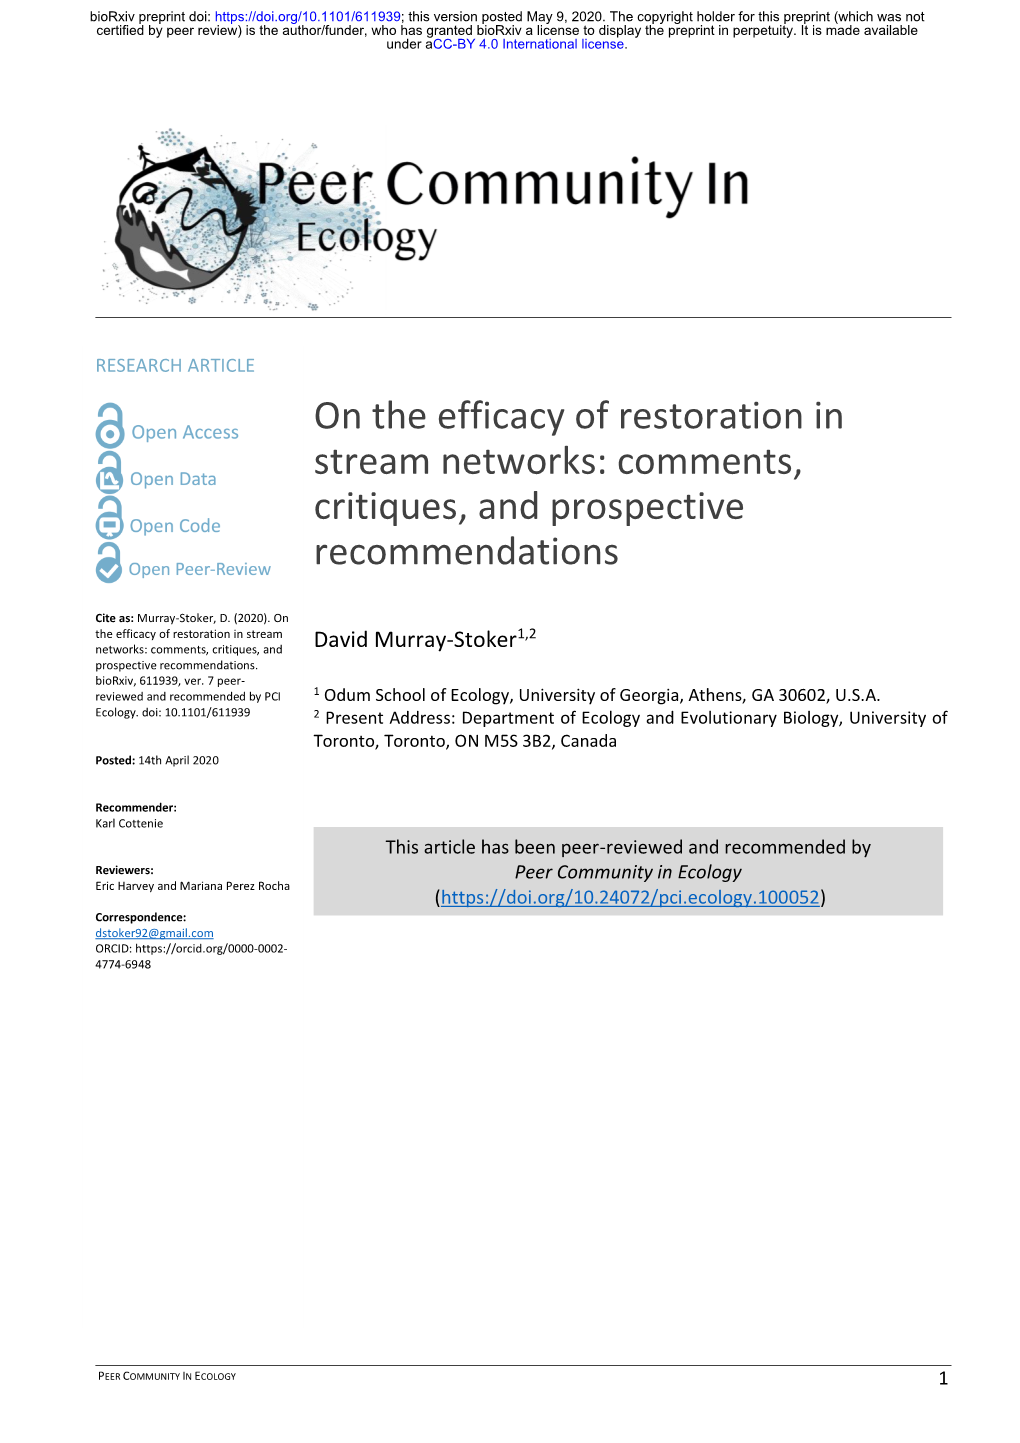 On the Efficacy of Restoration in Stream Networks: Comments, Critiques, and Prospective Recommendations